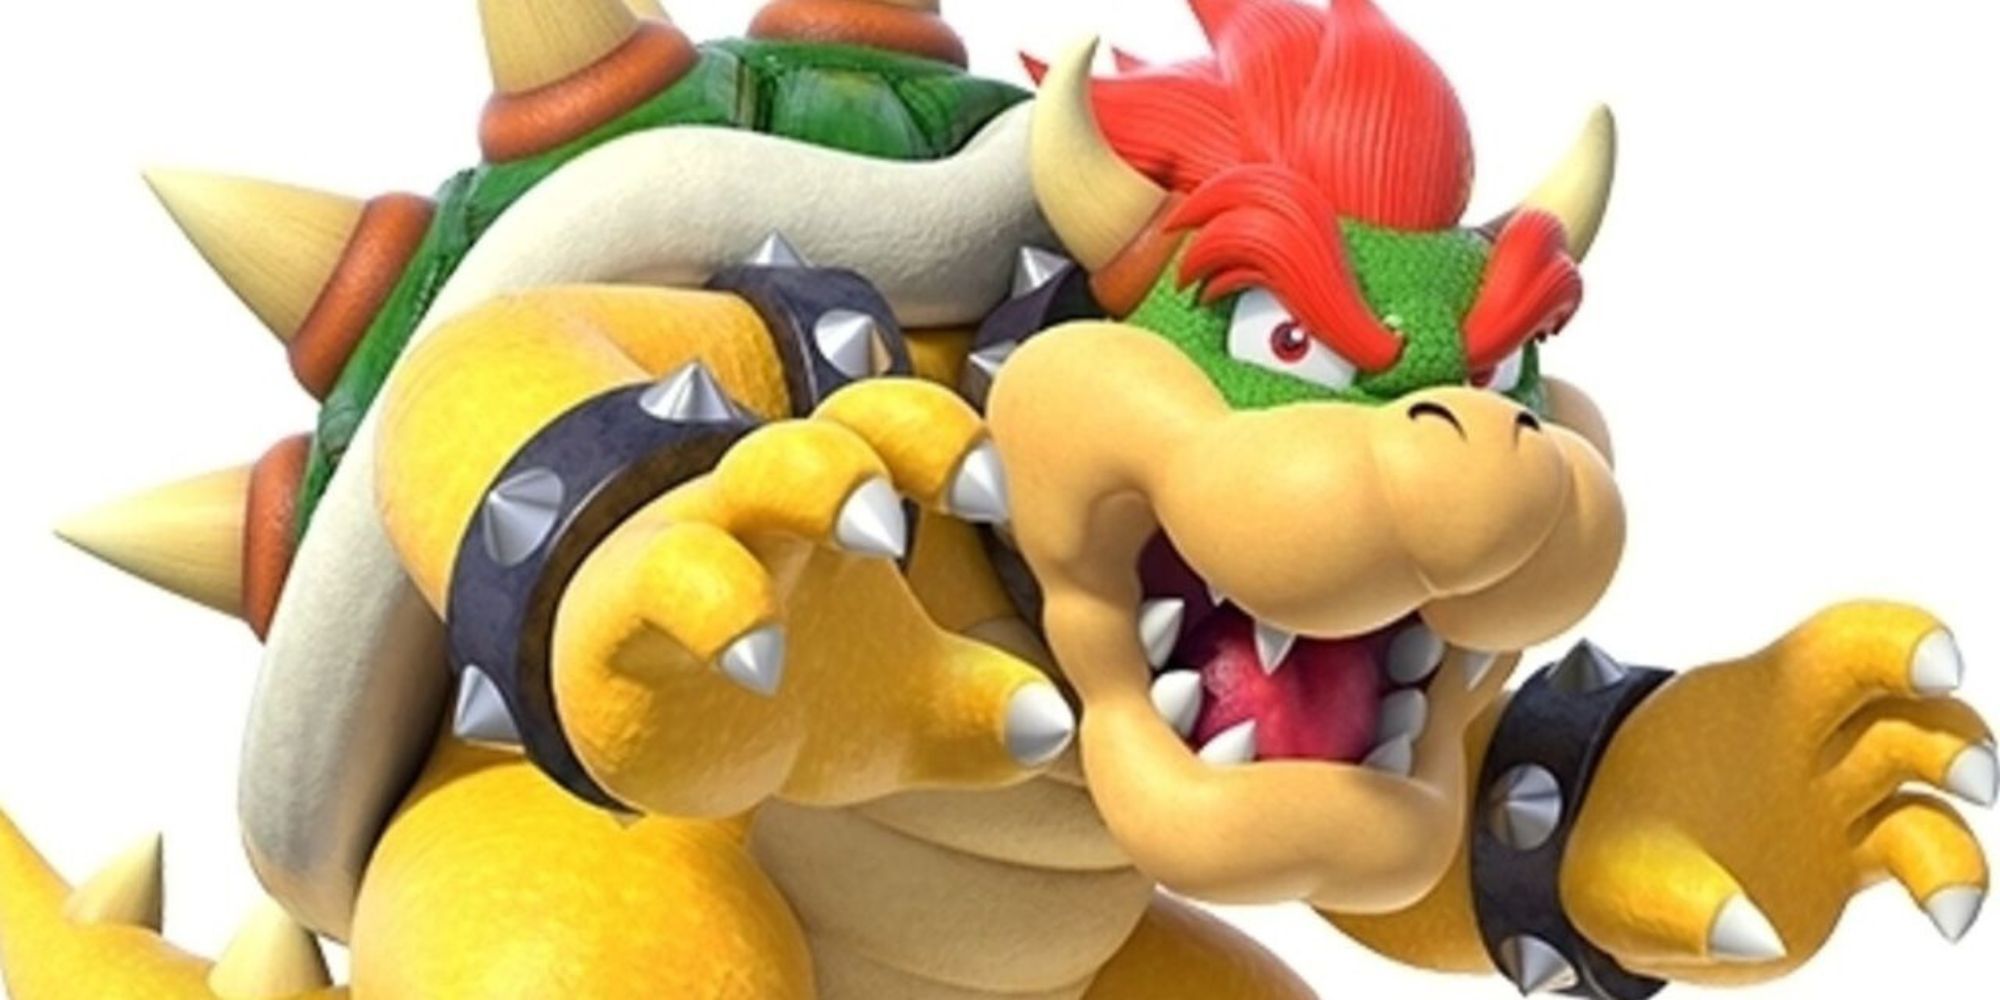 The Villain Bowser In The Super Mario Franchise